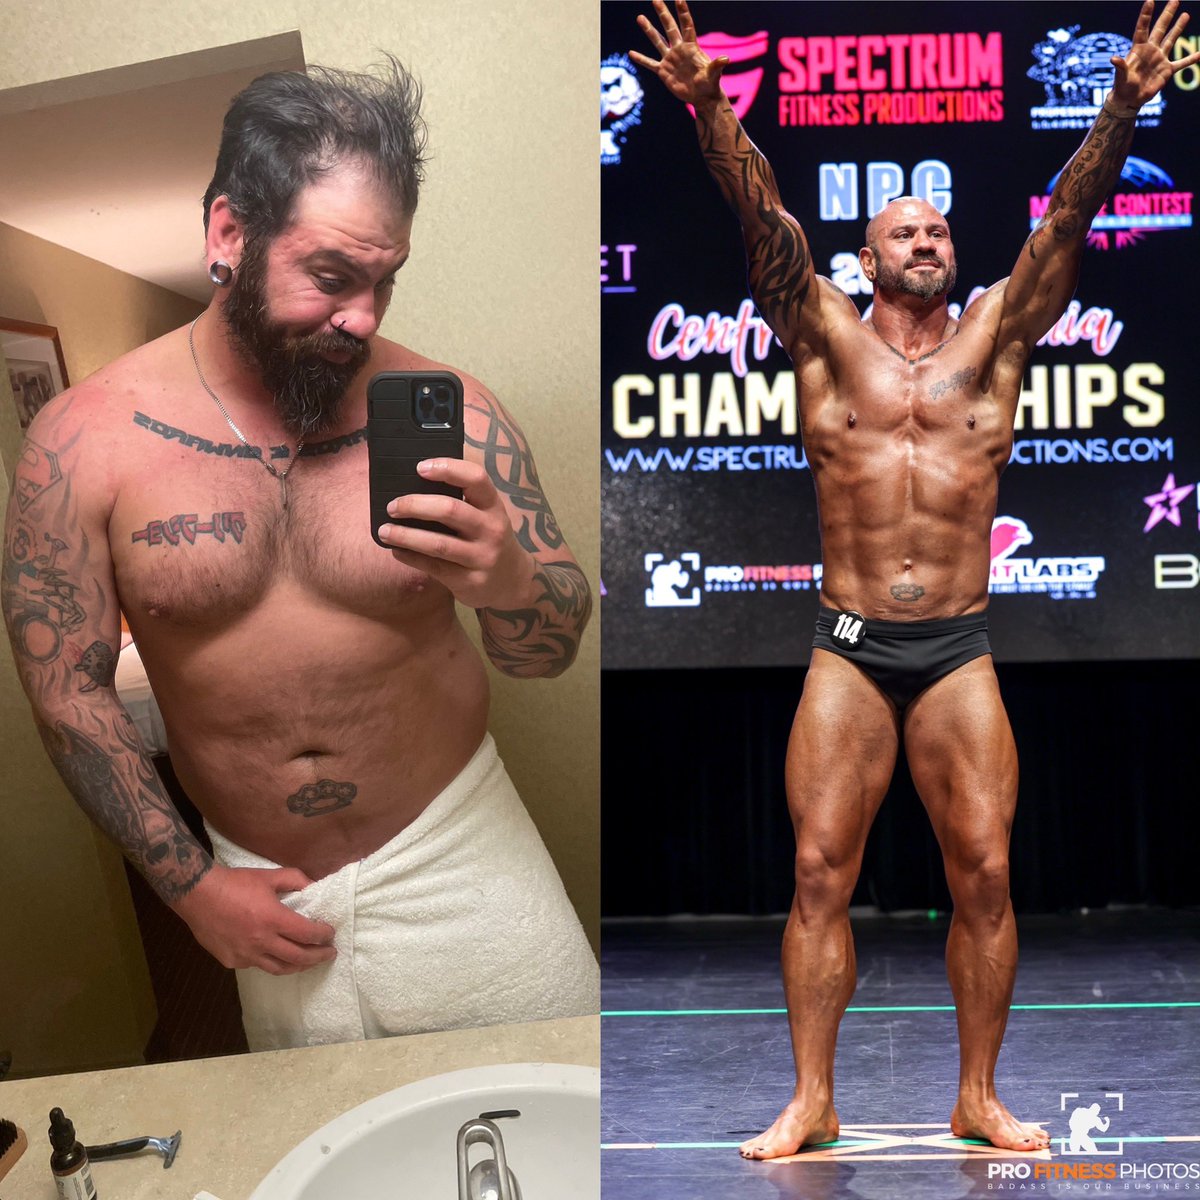 Feb 26 2022 - Sept 16 2023 Year in a half journey to get my depression and my body right! It has not been an easy road but life never is…I want to inspire people to go after their goals. If you can dream it, you can achieve it. Change Your Mindset Change Your Life!